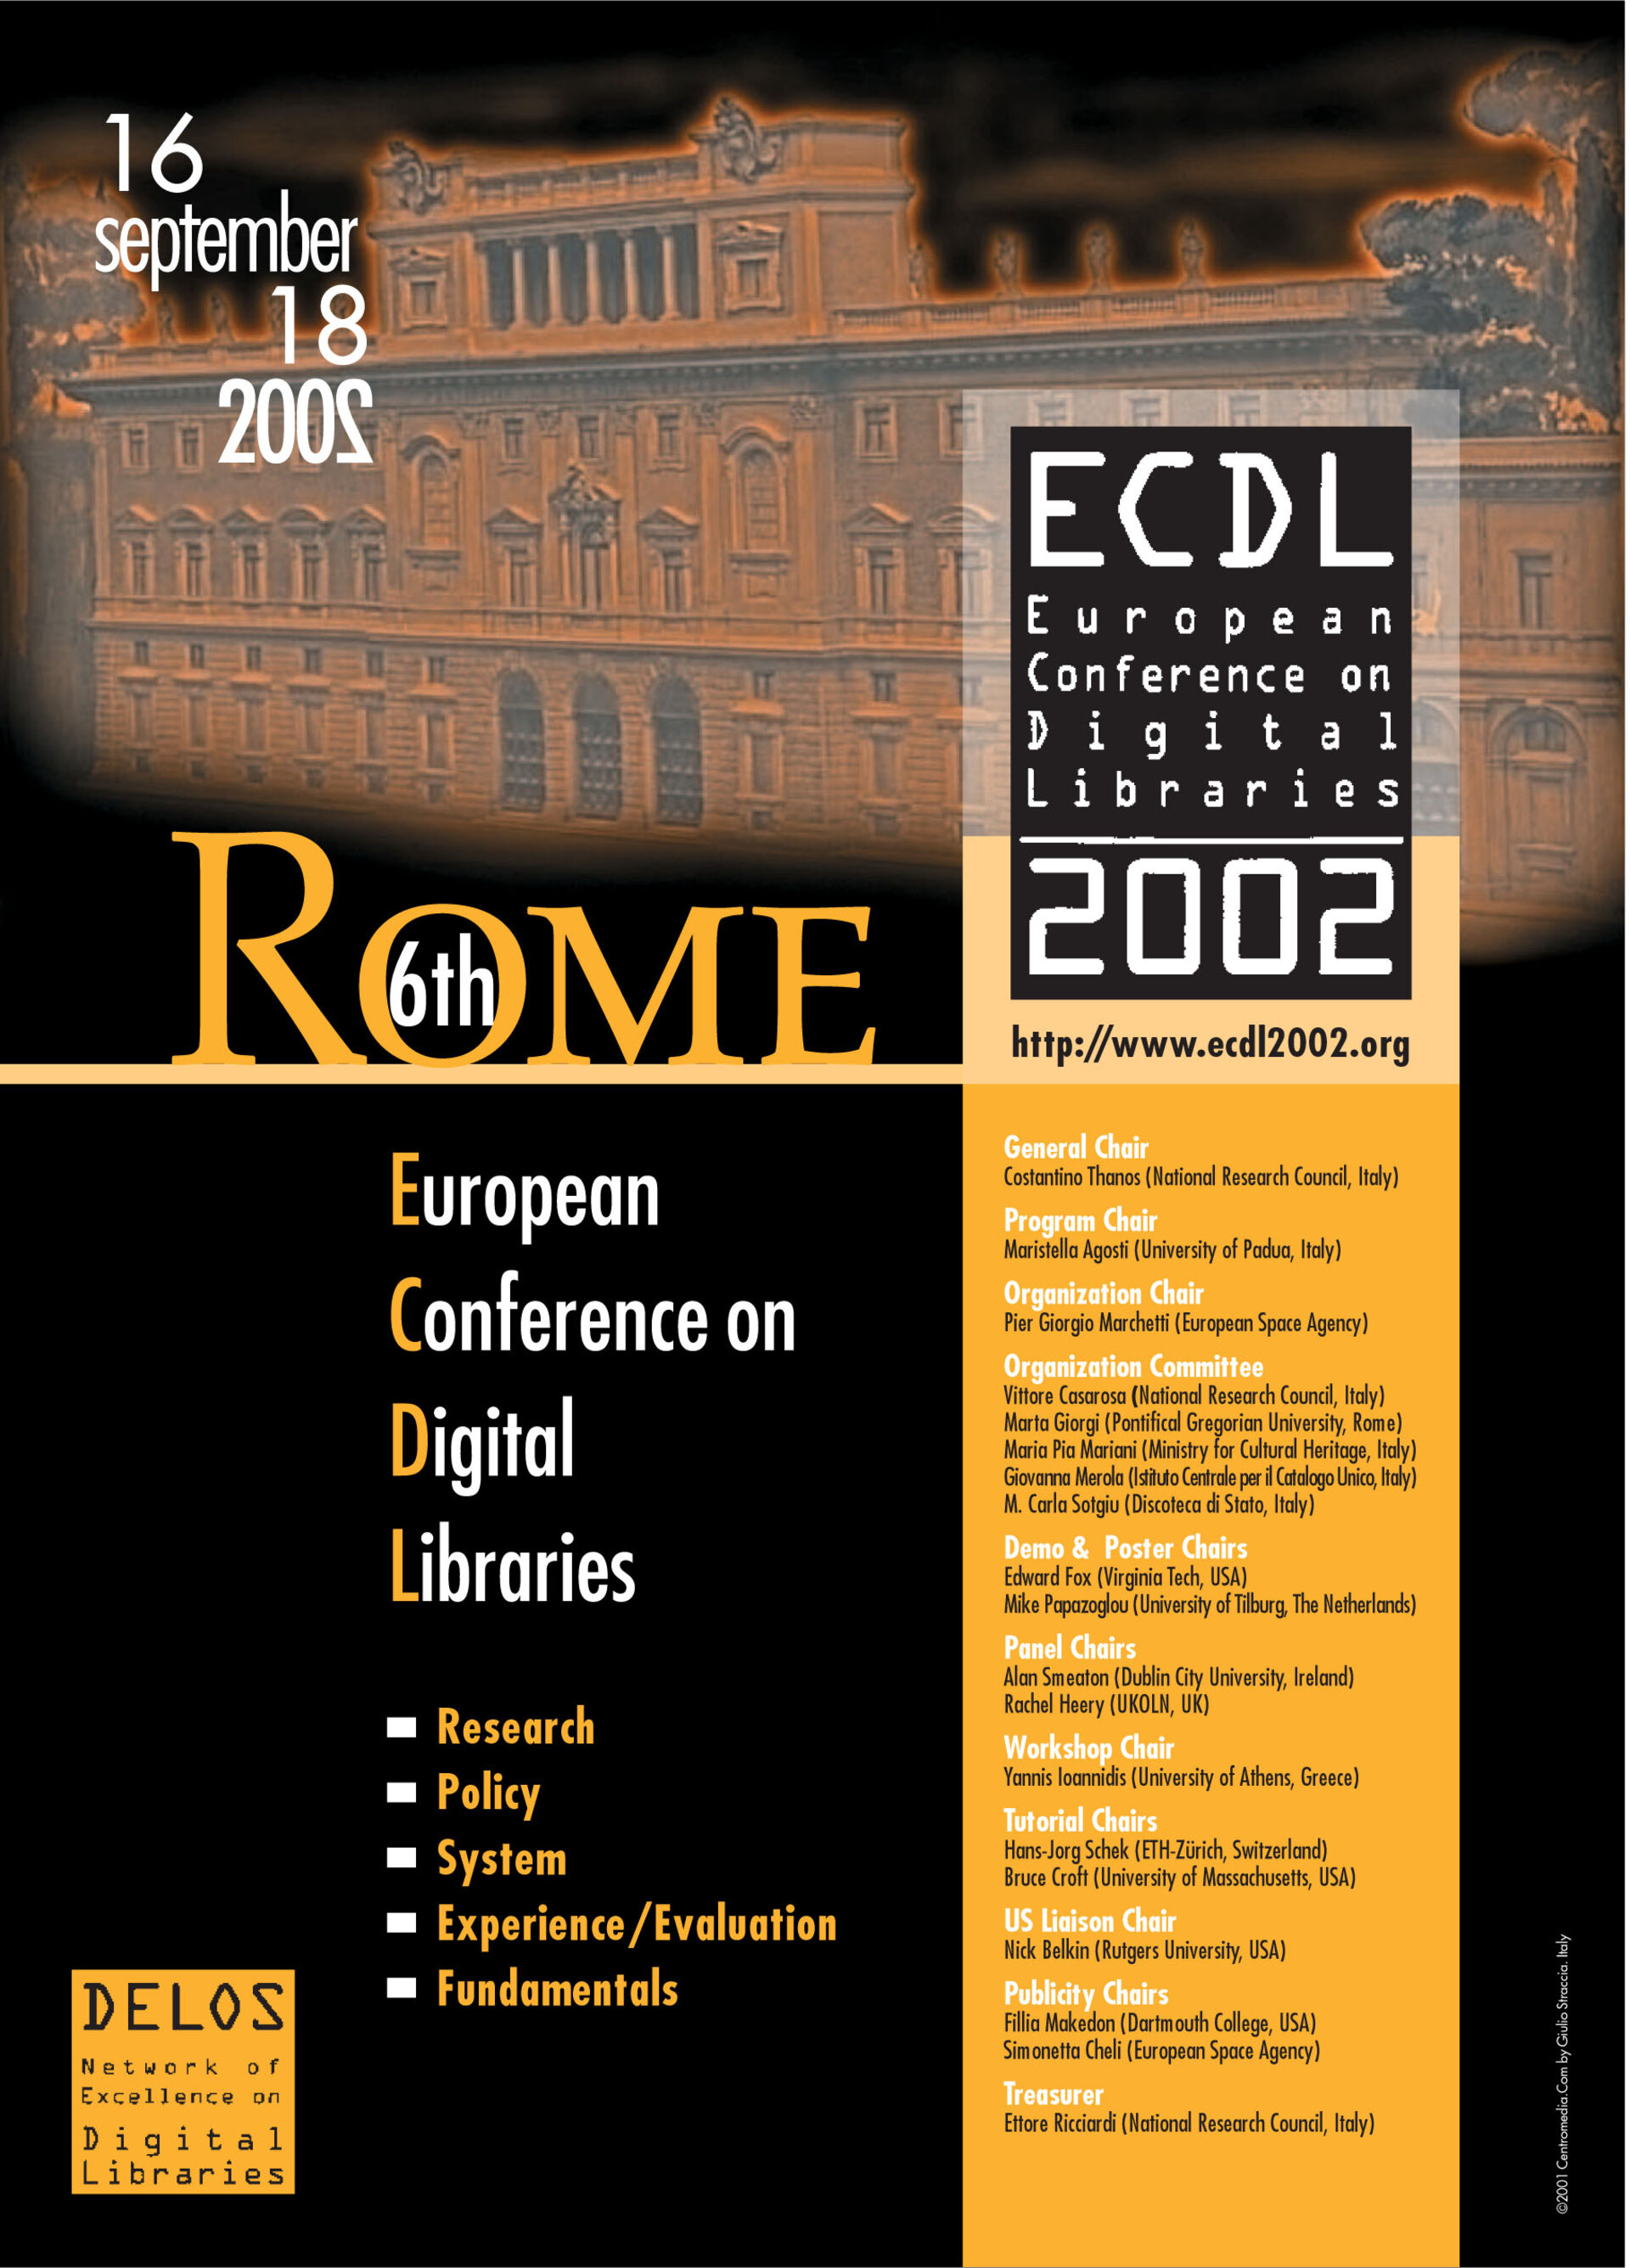 The ECDL 2002 poster